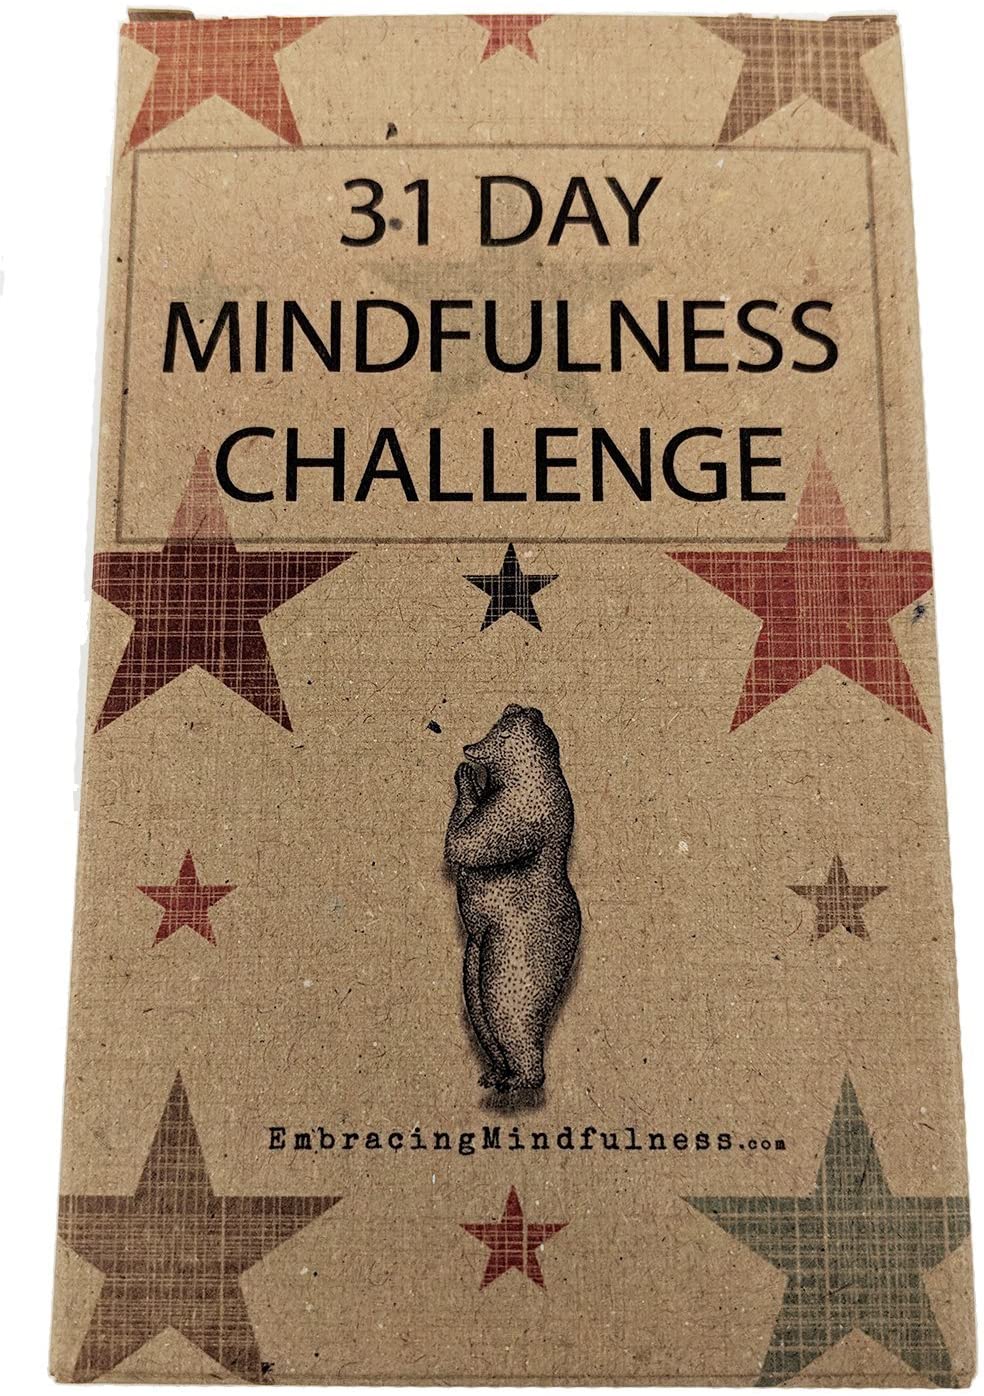 31 Day Mindfulness Challenge Cards - Take One a Day for a Month of Mindfulness